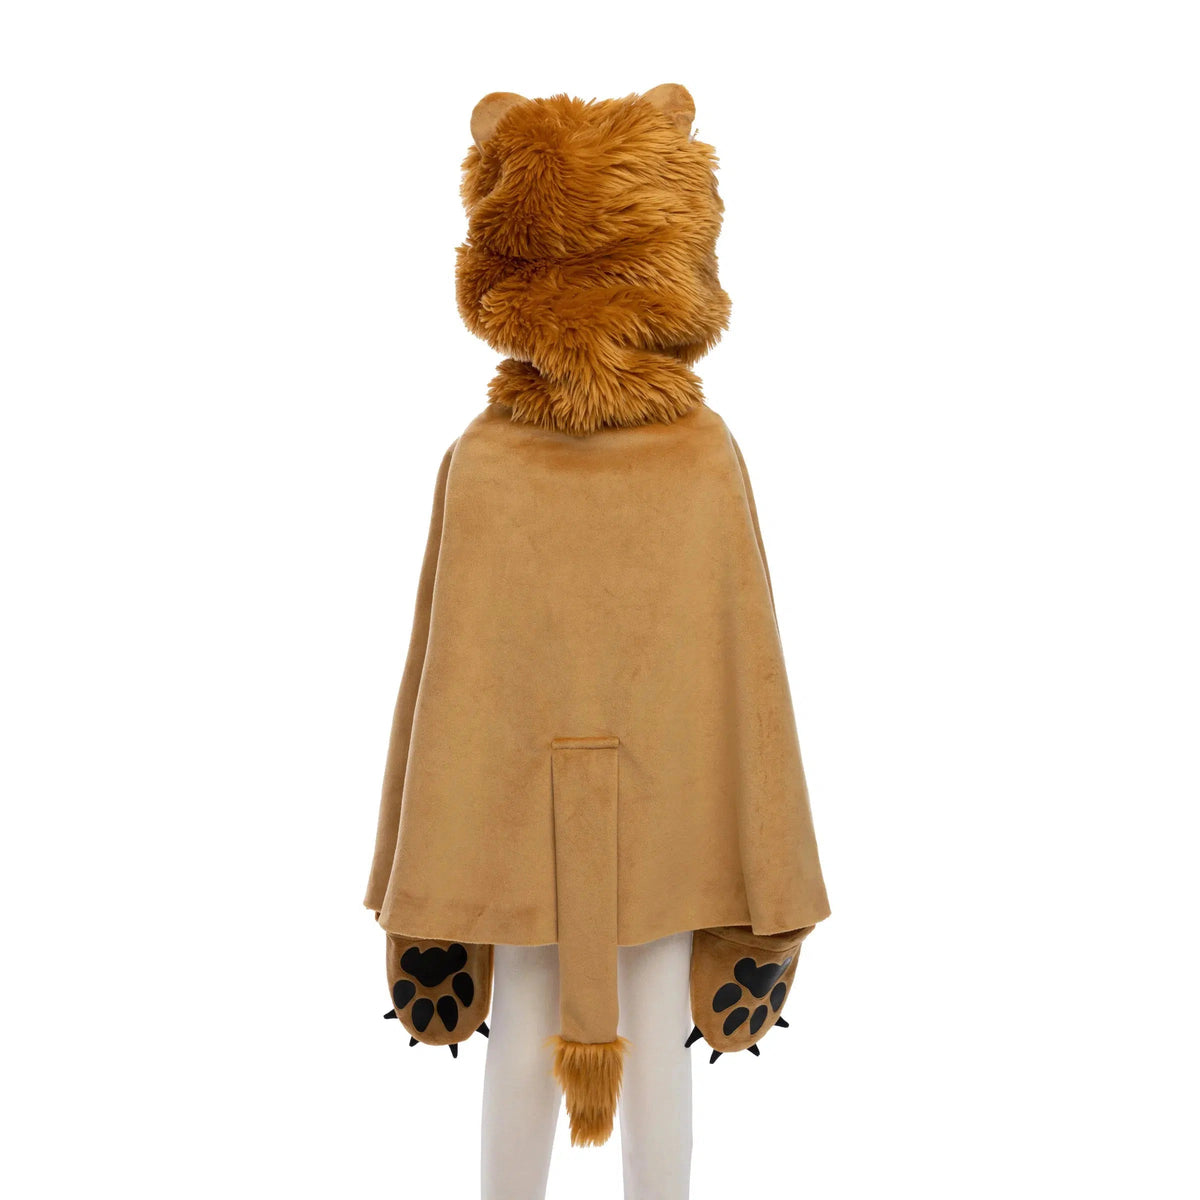 Back view of the lion cape on a mannequin.